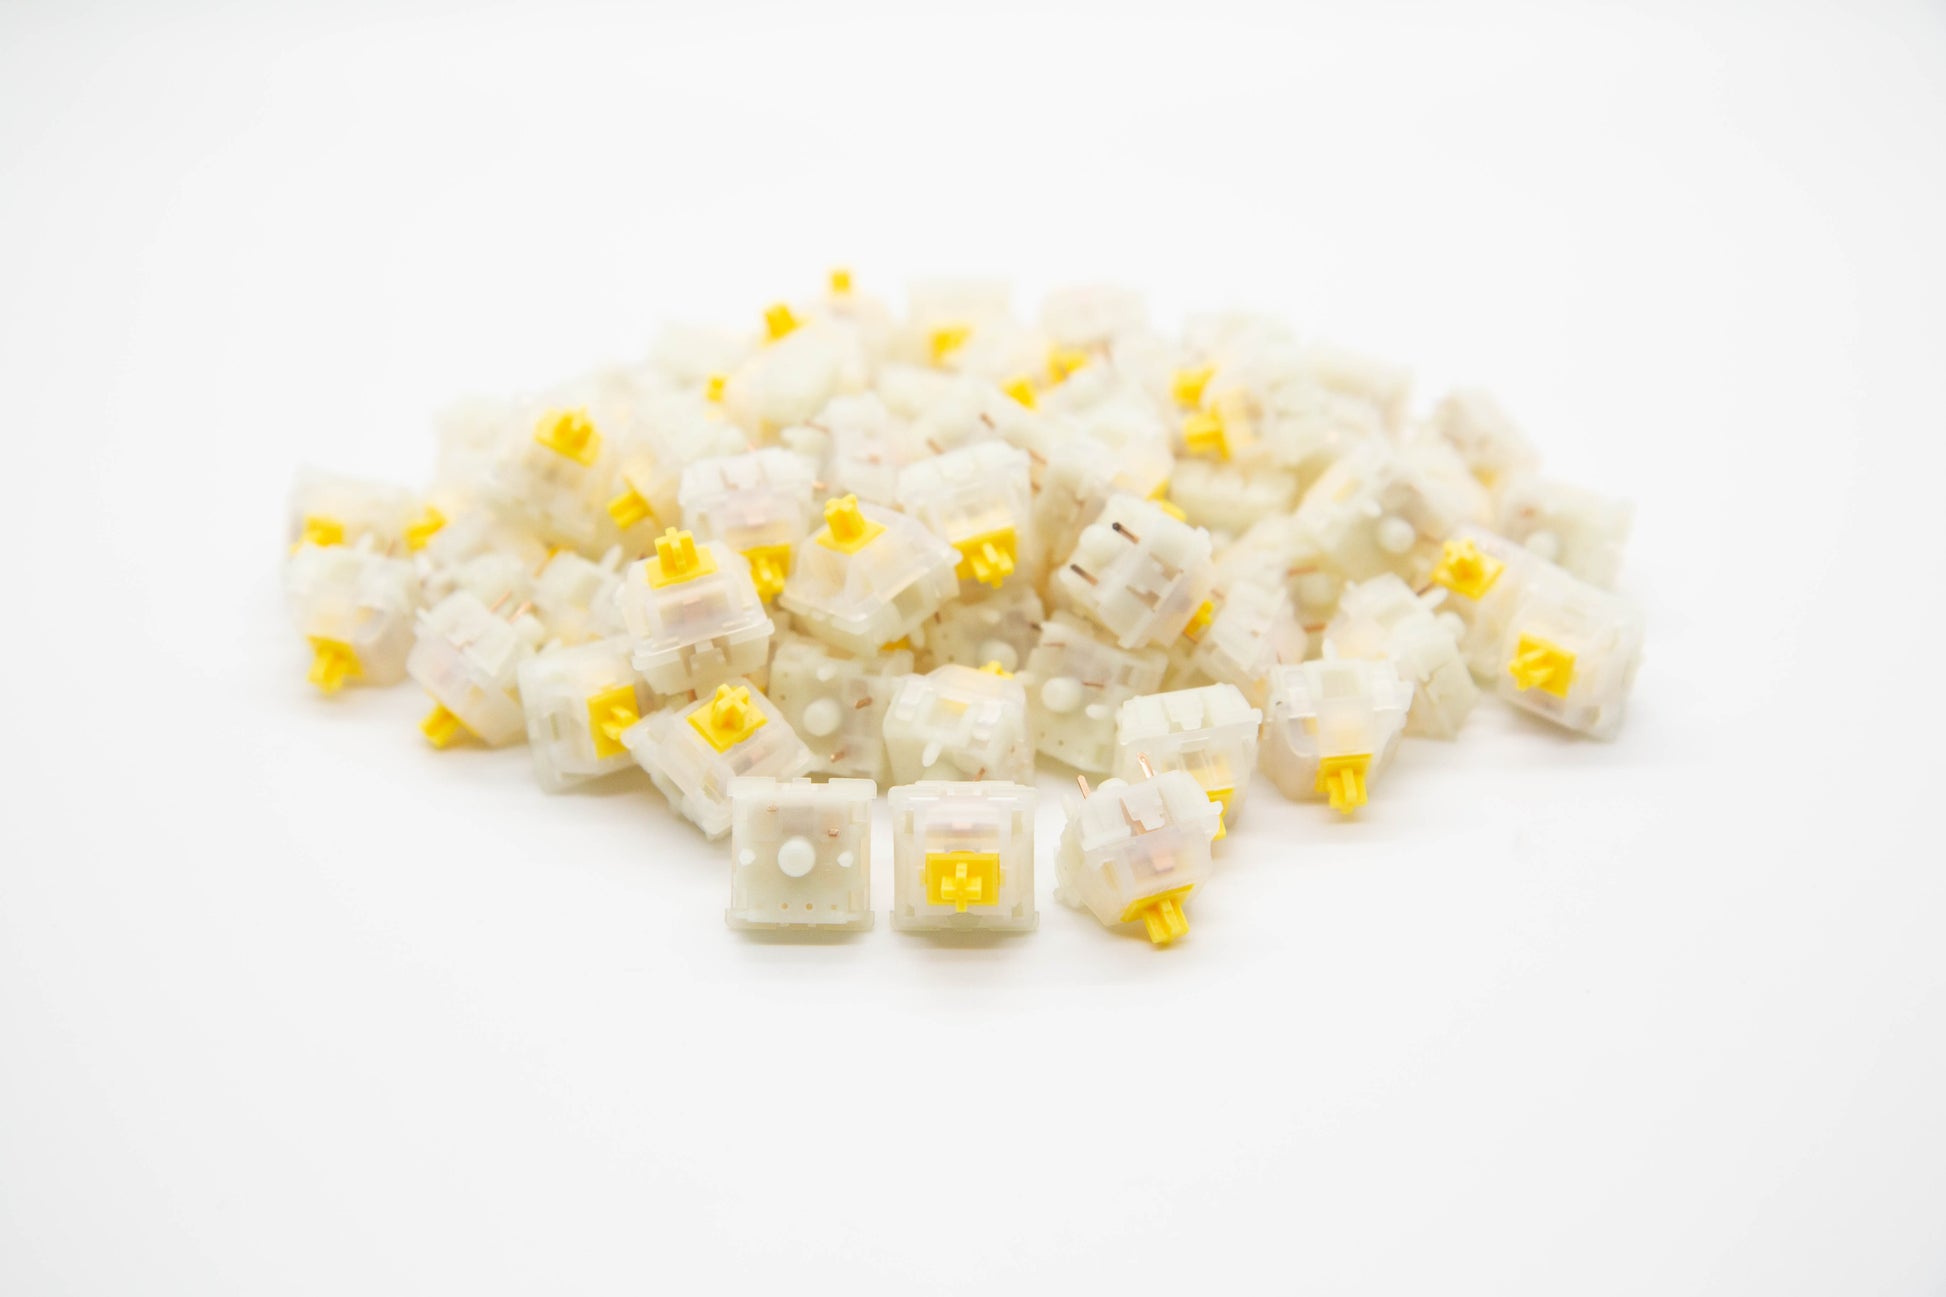 Close-up shot of a pile of Gateron Milky Green mechanical keyboard switches featuring white housing and yellow stems